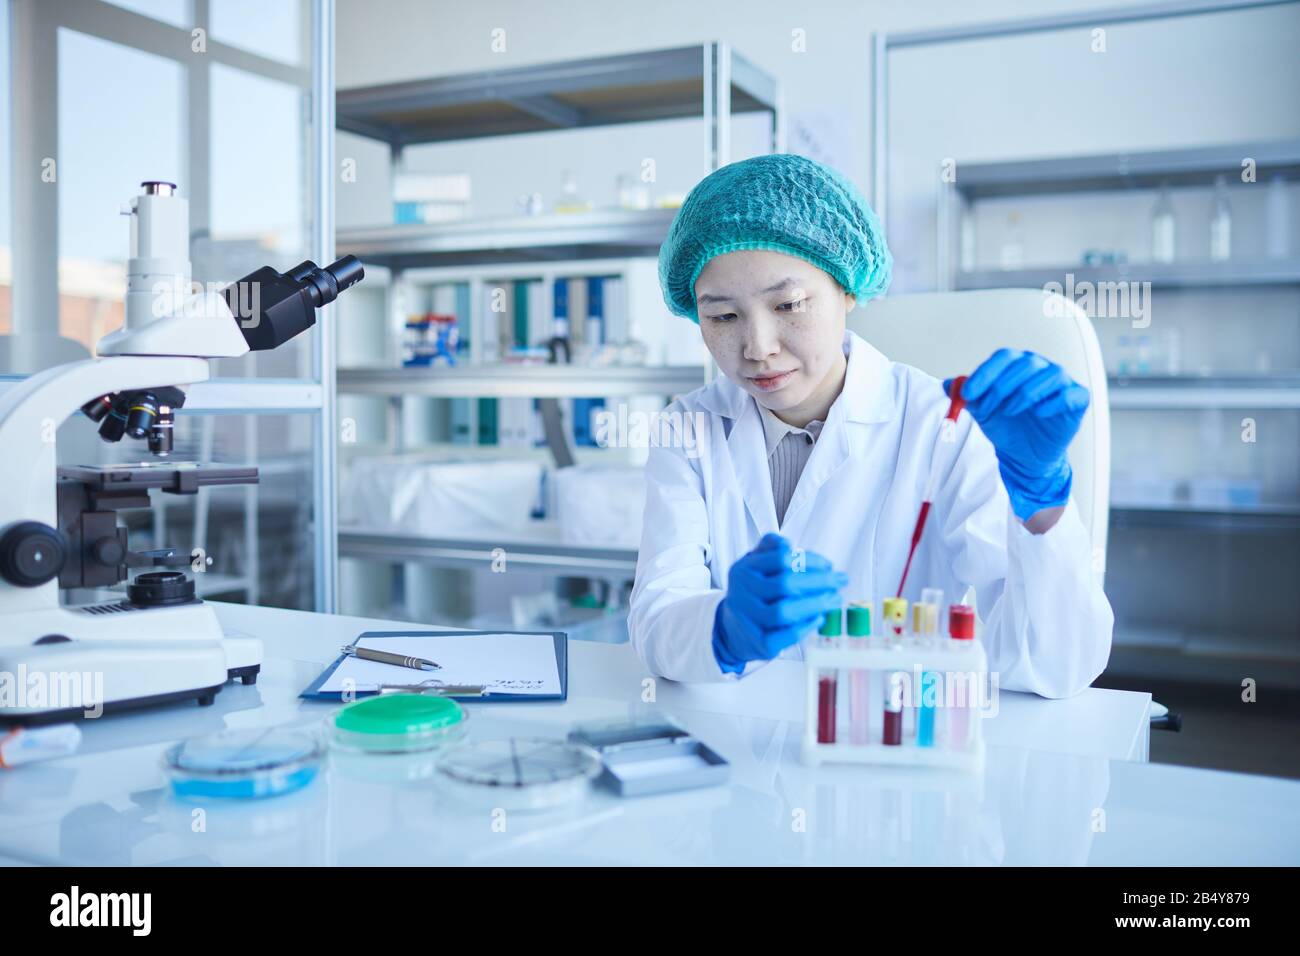 Horizontal portrait of concentrated young woman wearing lab coat, protective gloves and hat doing medical tests, copy space Stock Photo